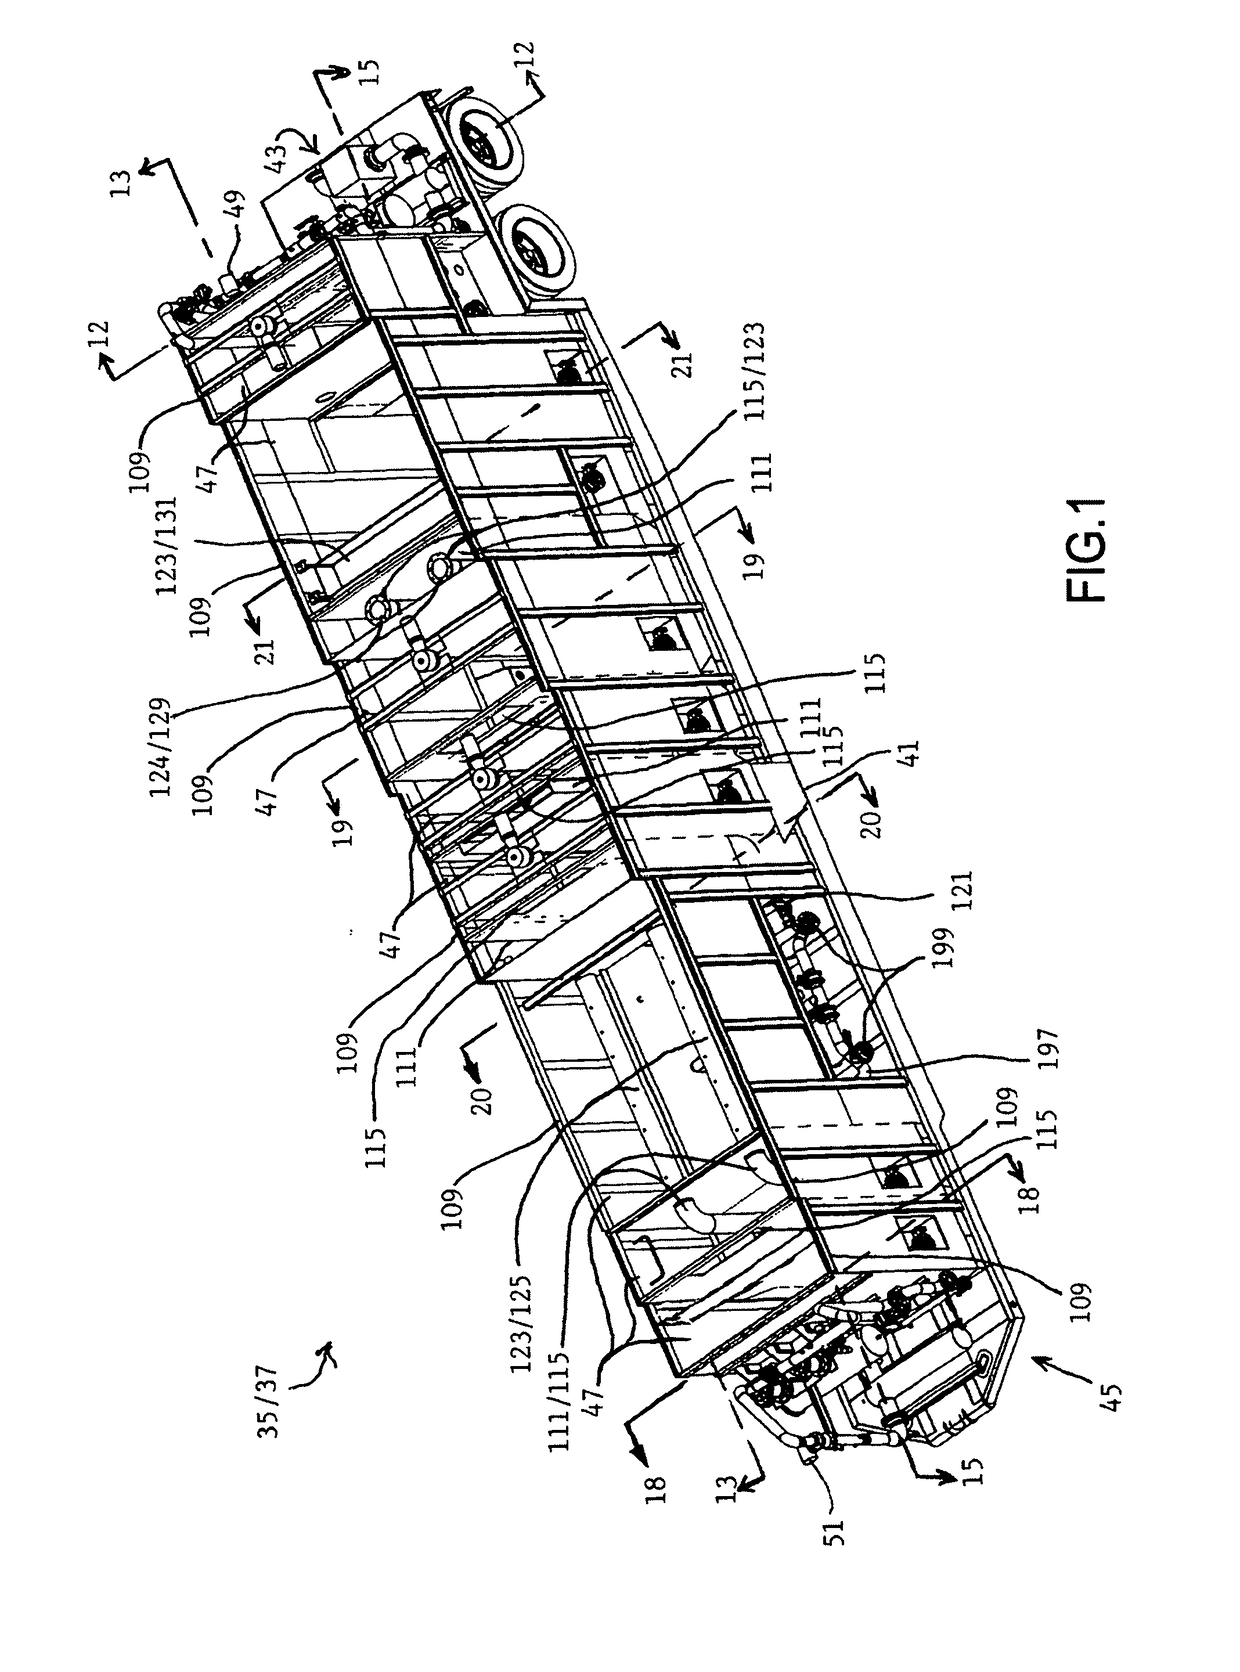 Liquid treatment station including plural mobile units and methods for operation thereof